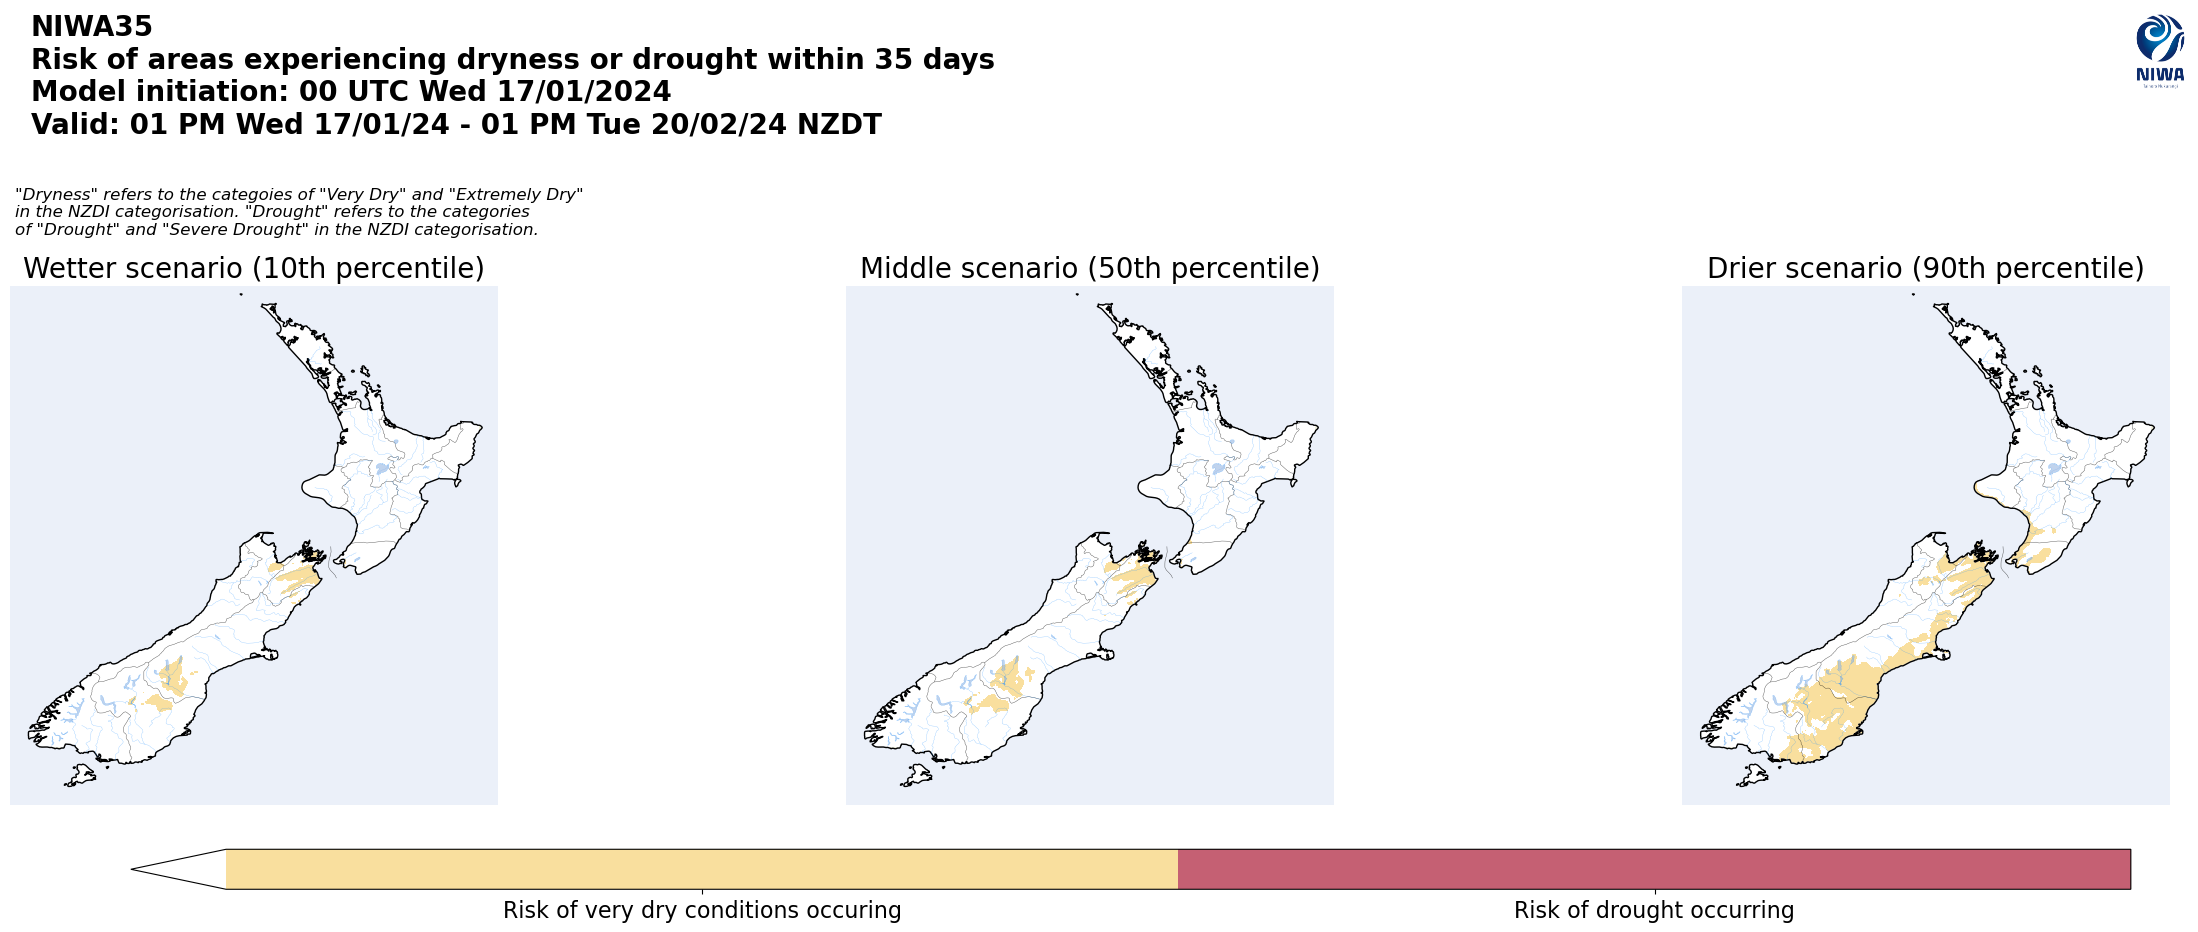 Risk of areas experiencing dryness or drought within 35 days from 17 January 2024. [NIWA]